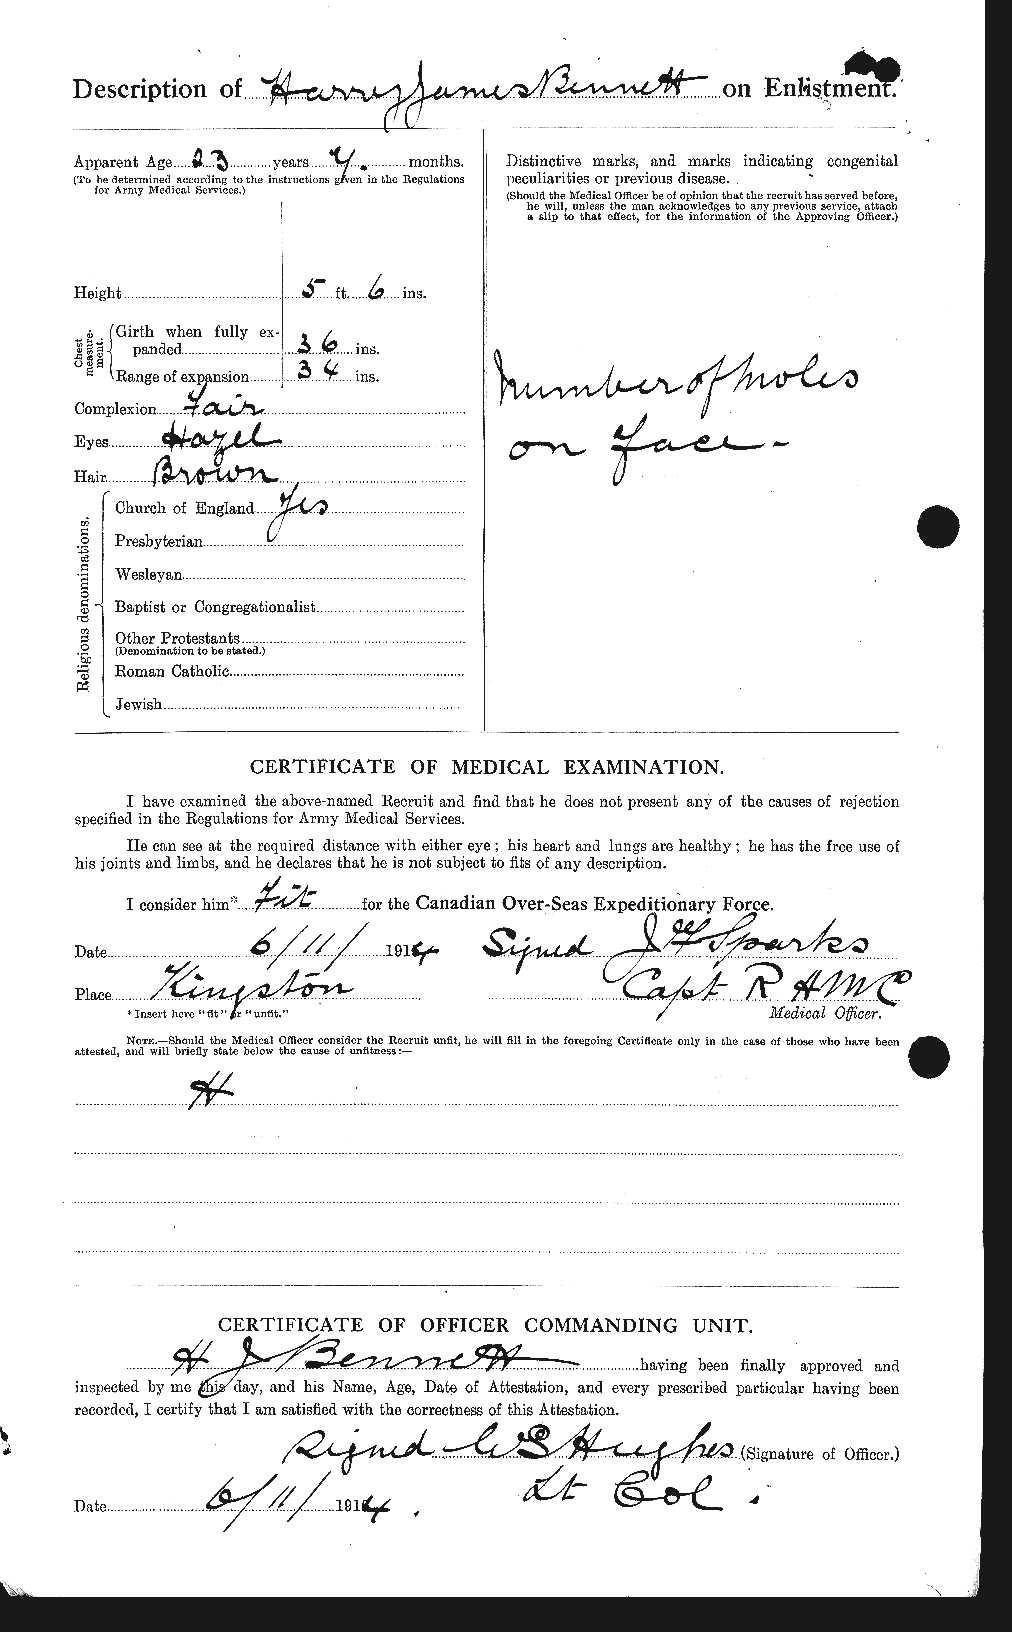 Personnel Records of the First World War - CEF 238551b